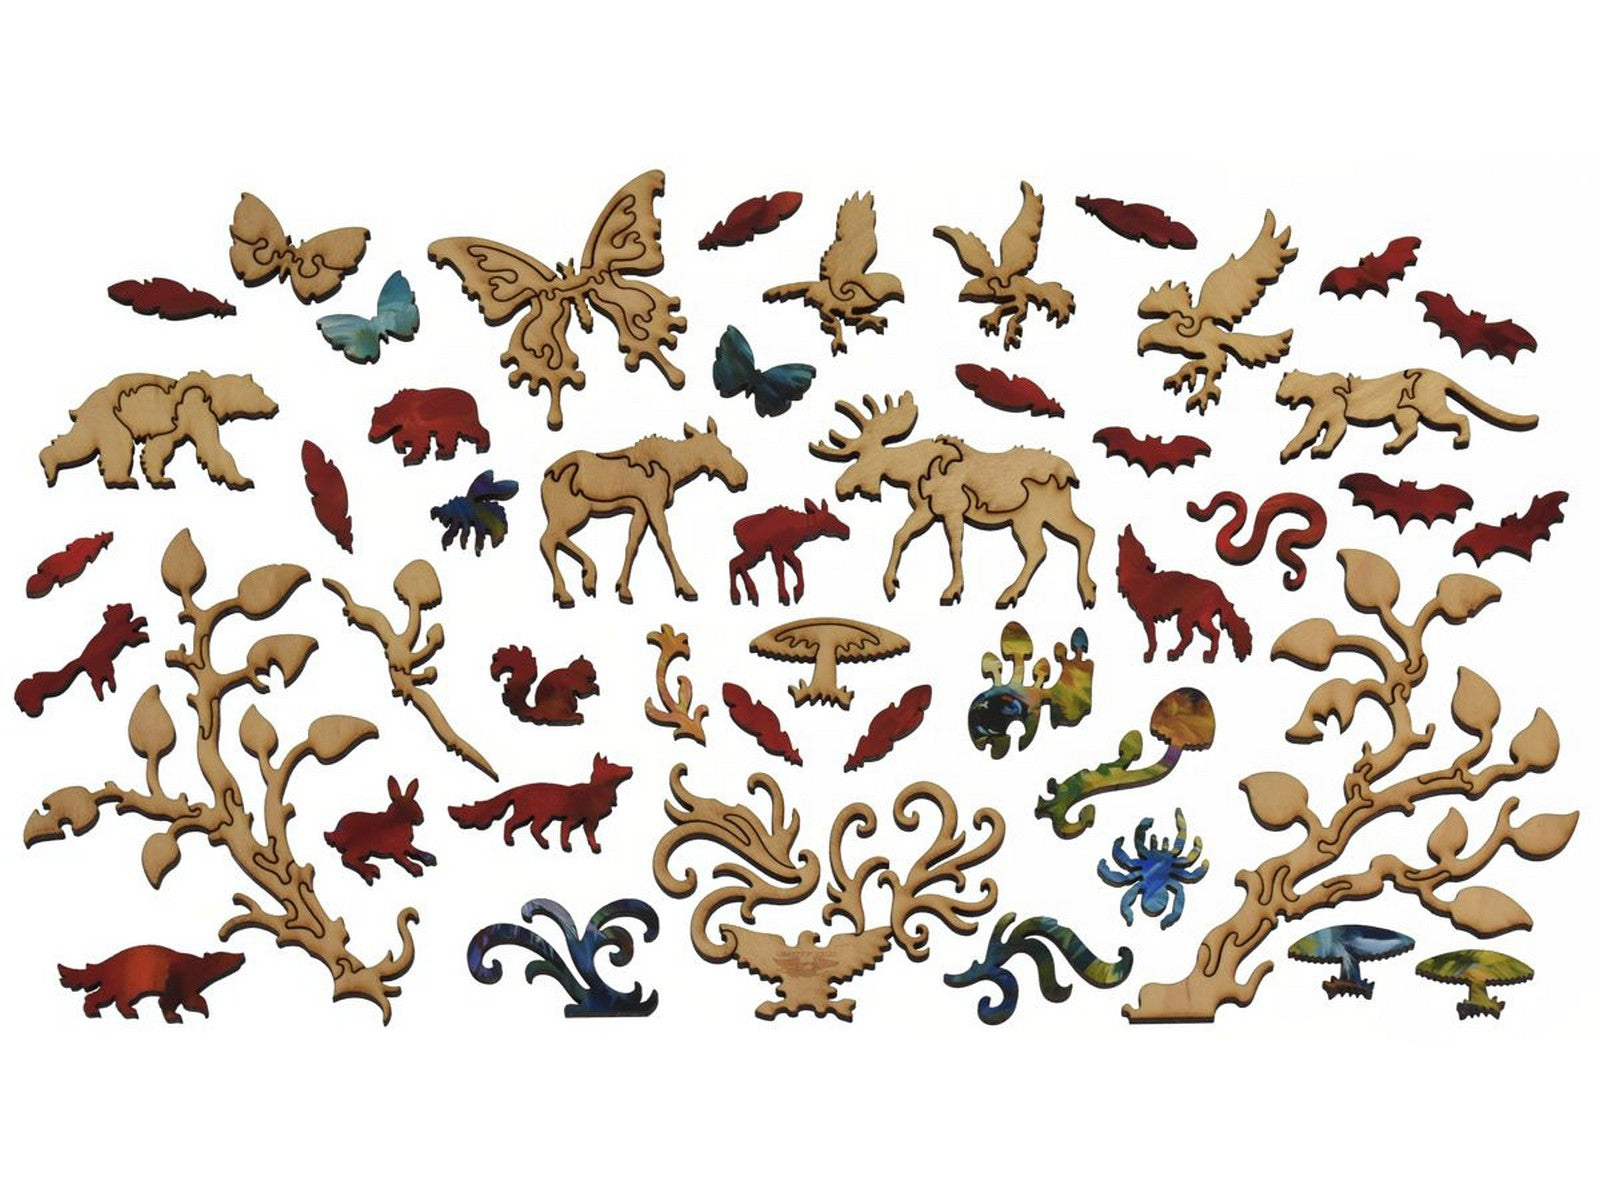 The whimsies that can be found in the puzzle, Troublesome Moose.